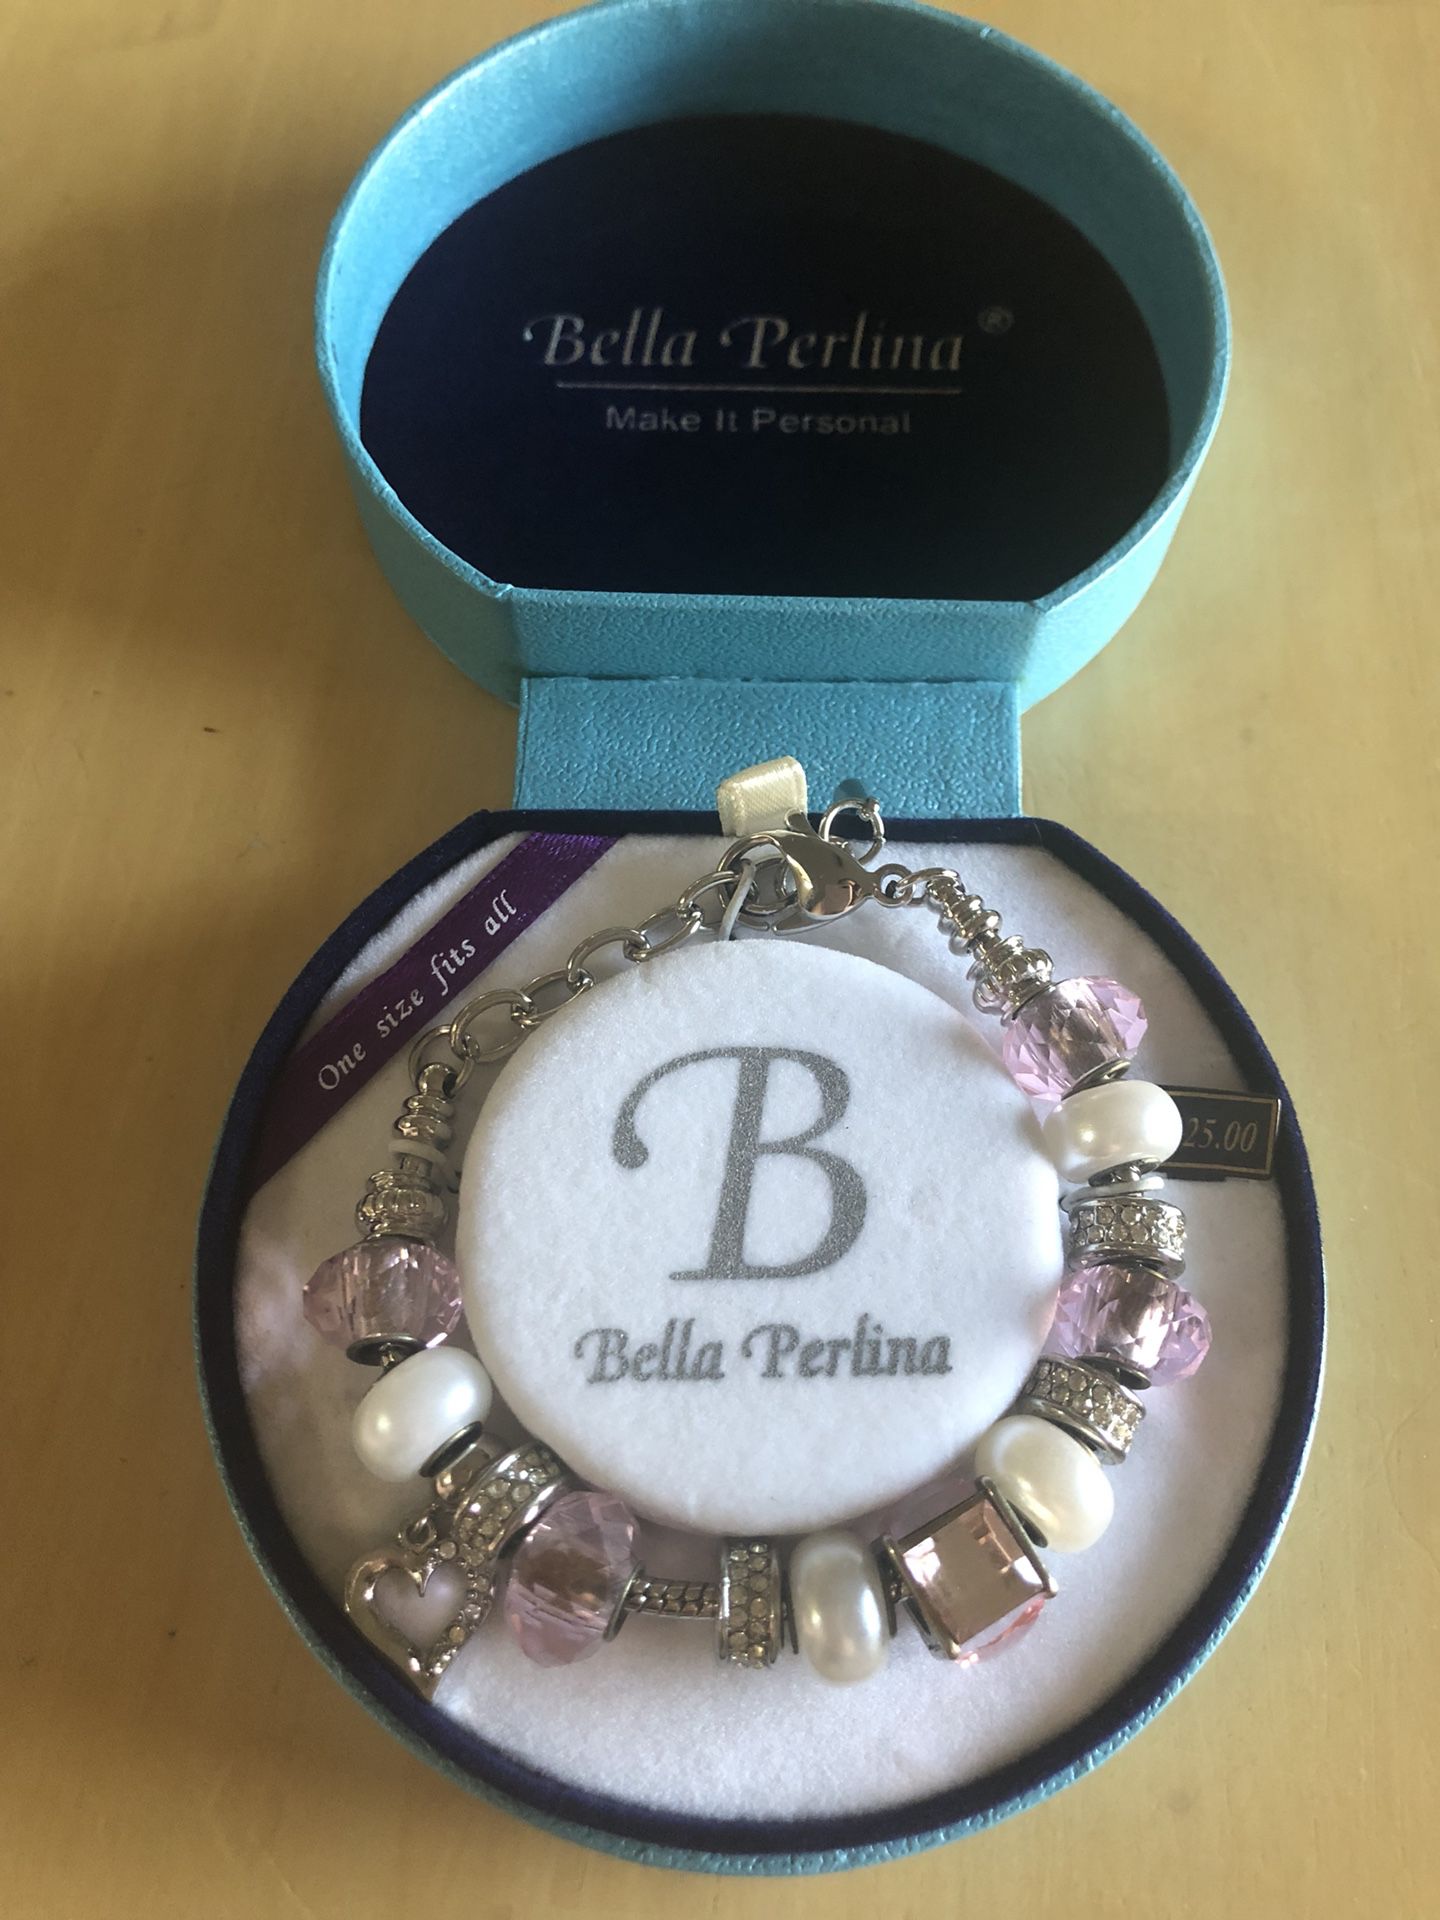 Bella Perlina 925 Sterling silver bracelet with full set of charms for sale, brand new in box